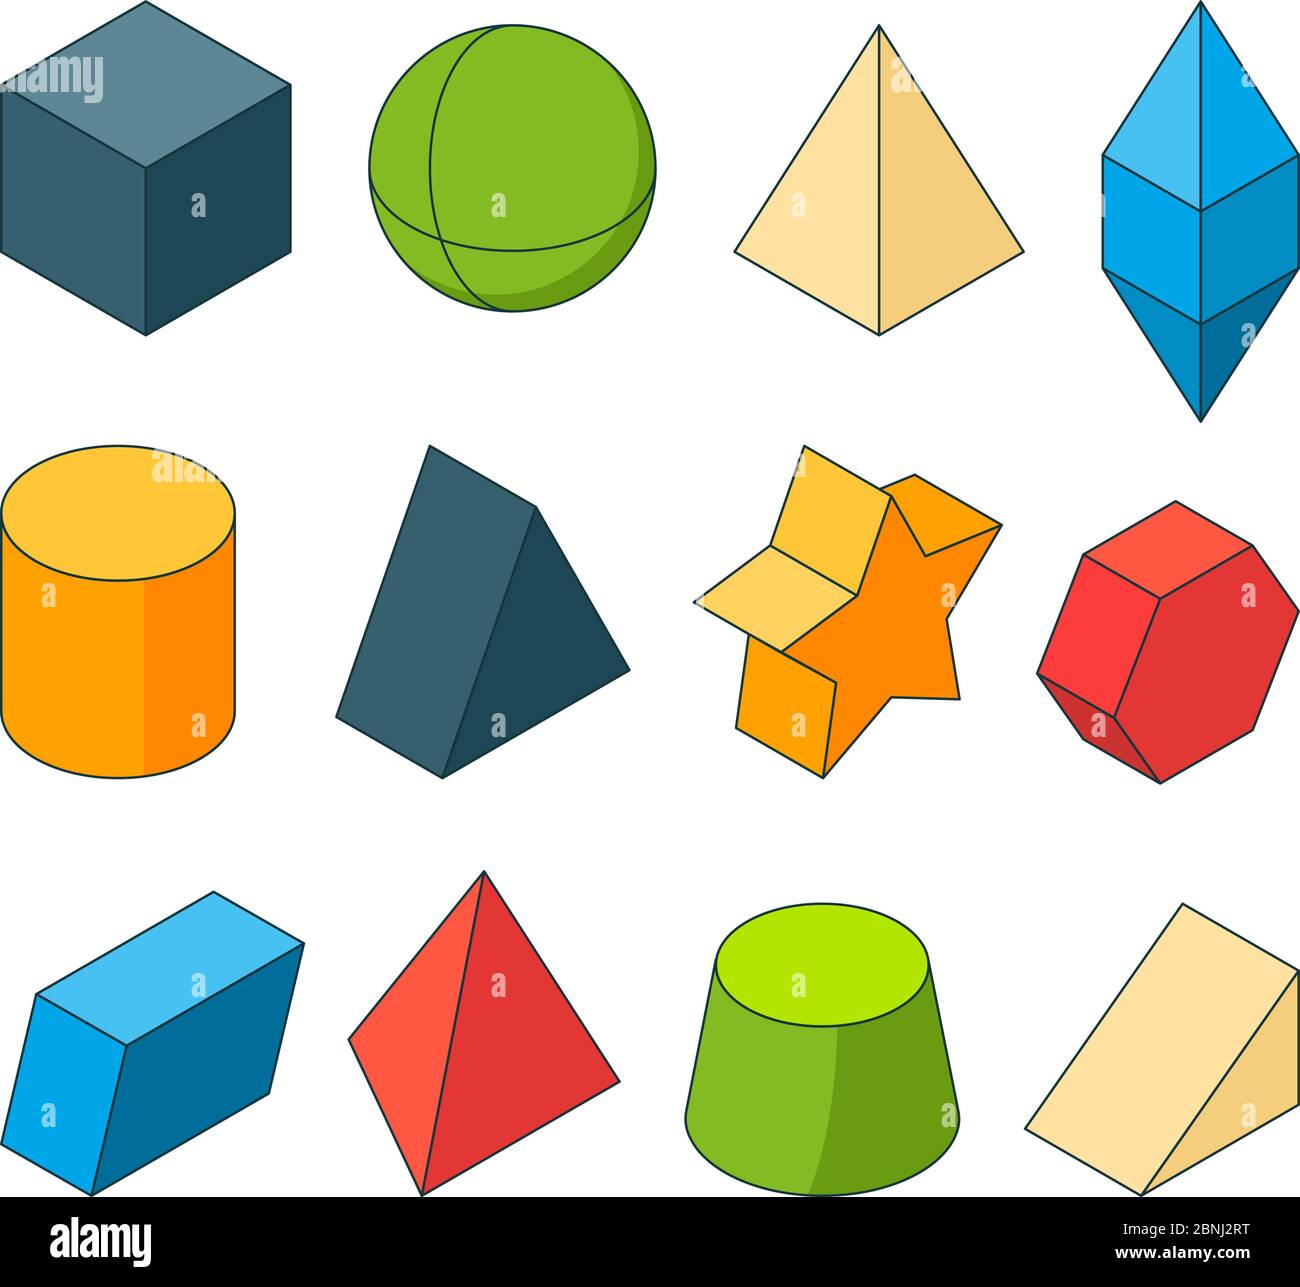 3d model of geometry shapes. Colored pictures sets. Pyramids, stars, cube and others Stock Vector